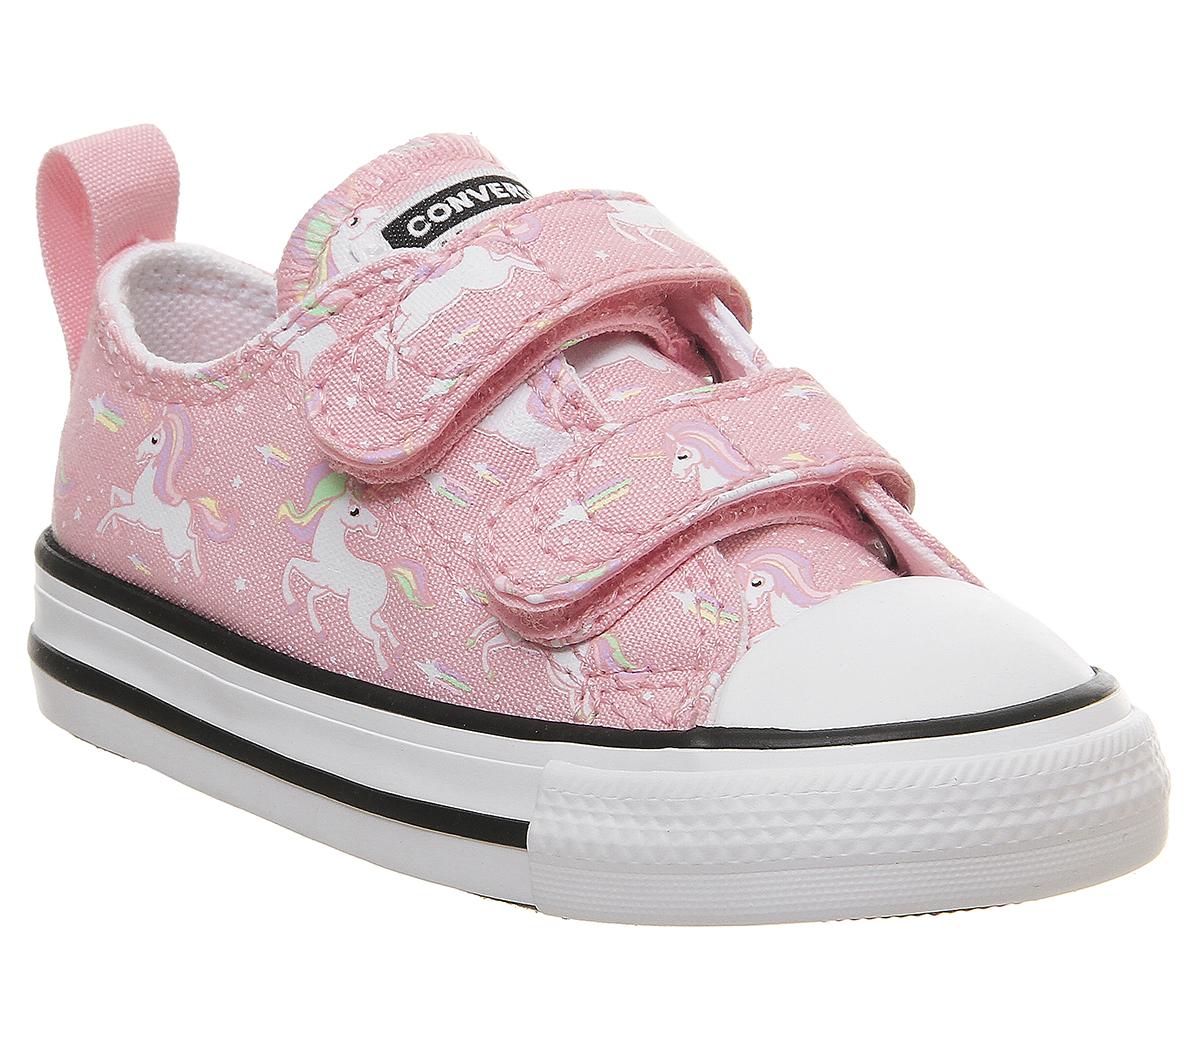 Converse All Star 2vlace Trainers Pink 